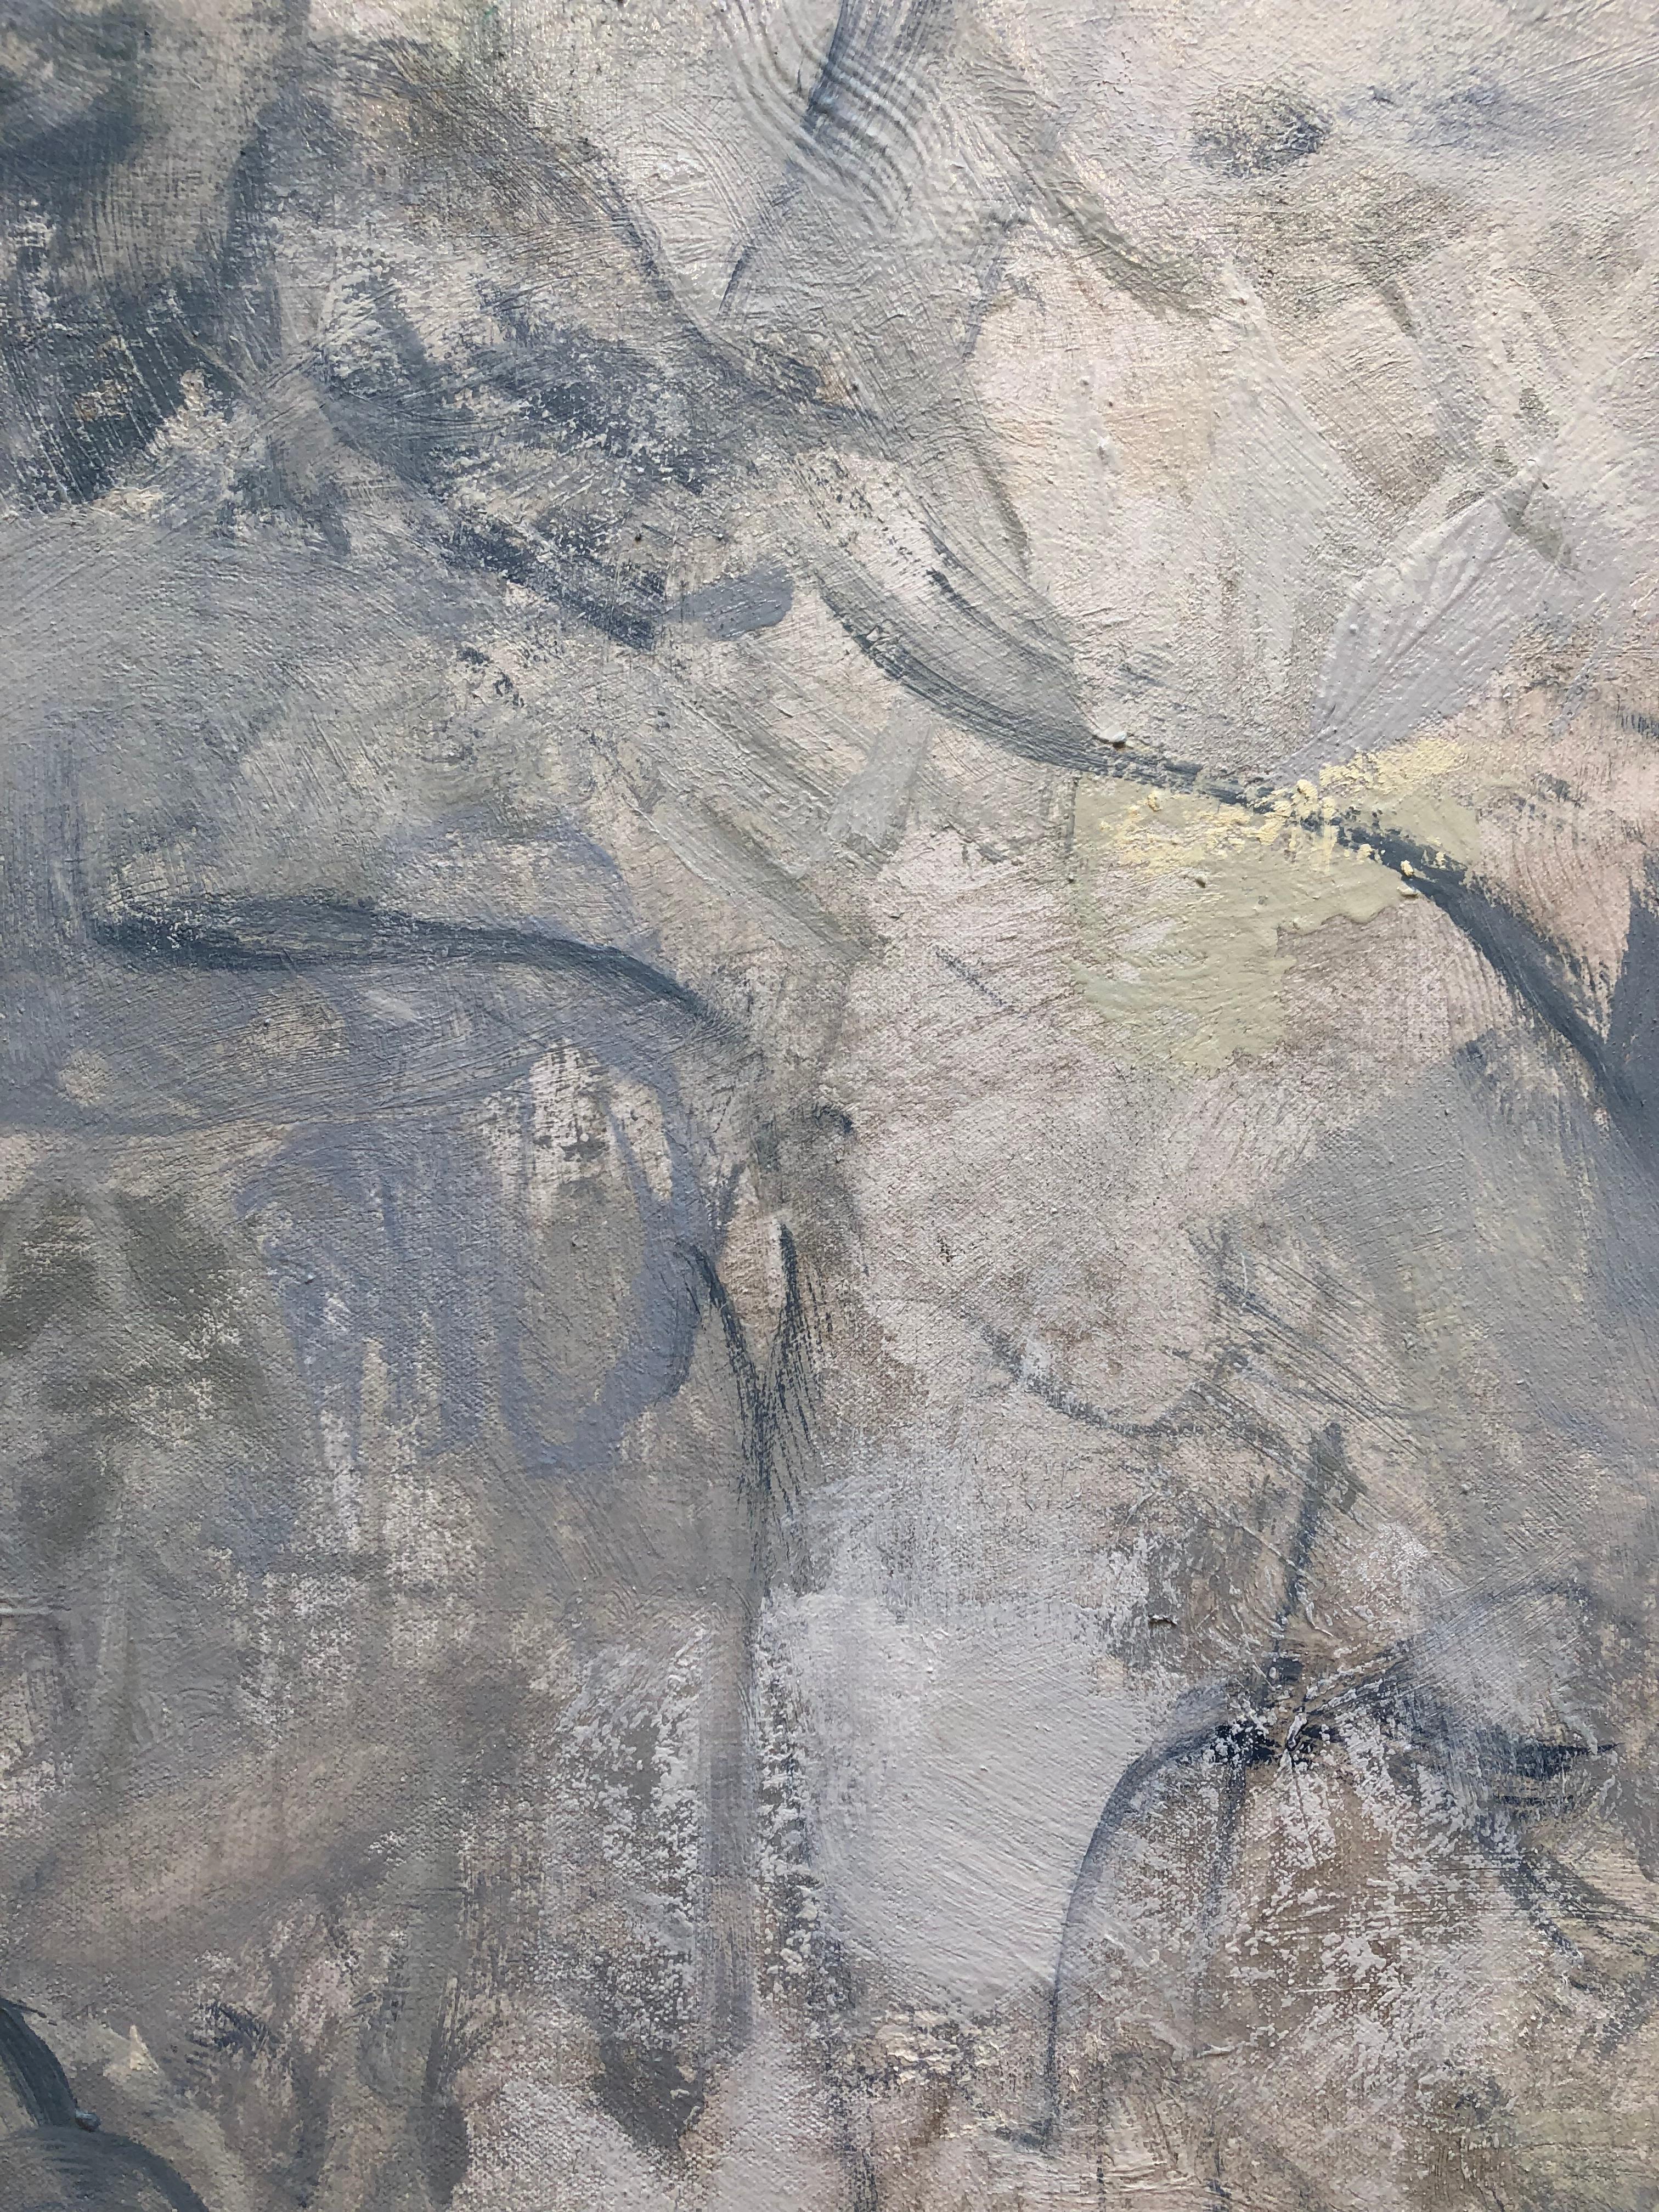 Anne Raymond's work turns outward to the natural world and is inspired by nature and the transitory quality of changing light. Sky, water and motion are recurring themes. This large playful painting is a luminous marriage of silvery whites, ivory